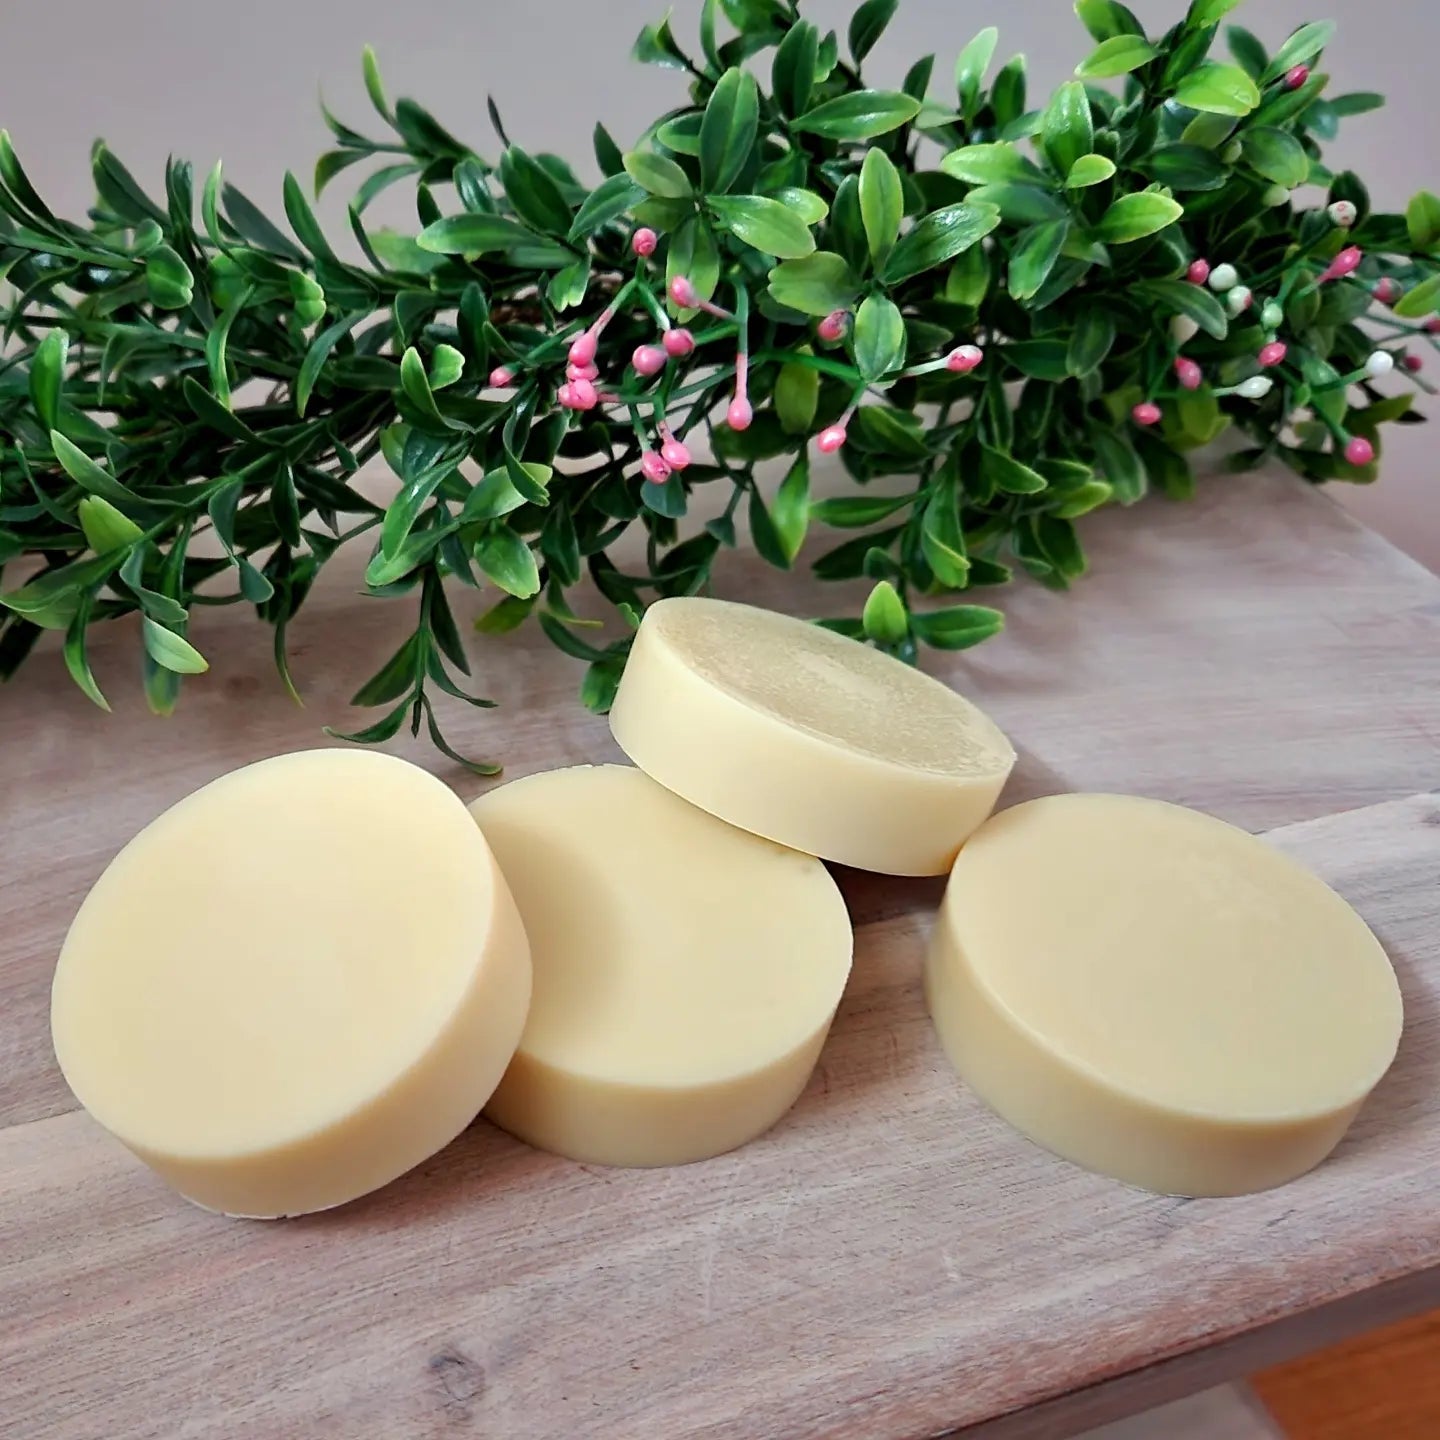 Lotion Bar with Metal Tin / Coconut